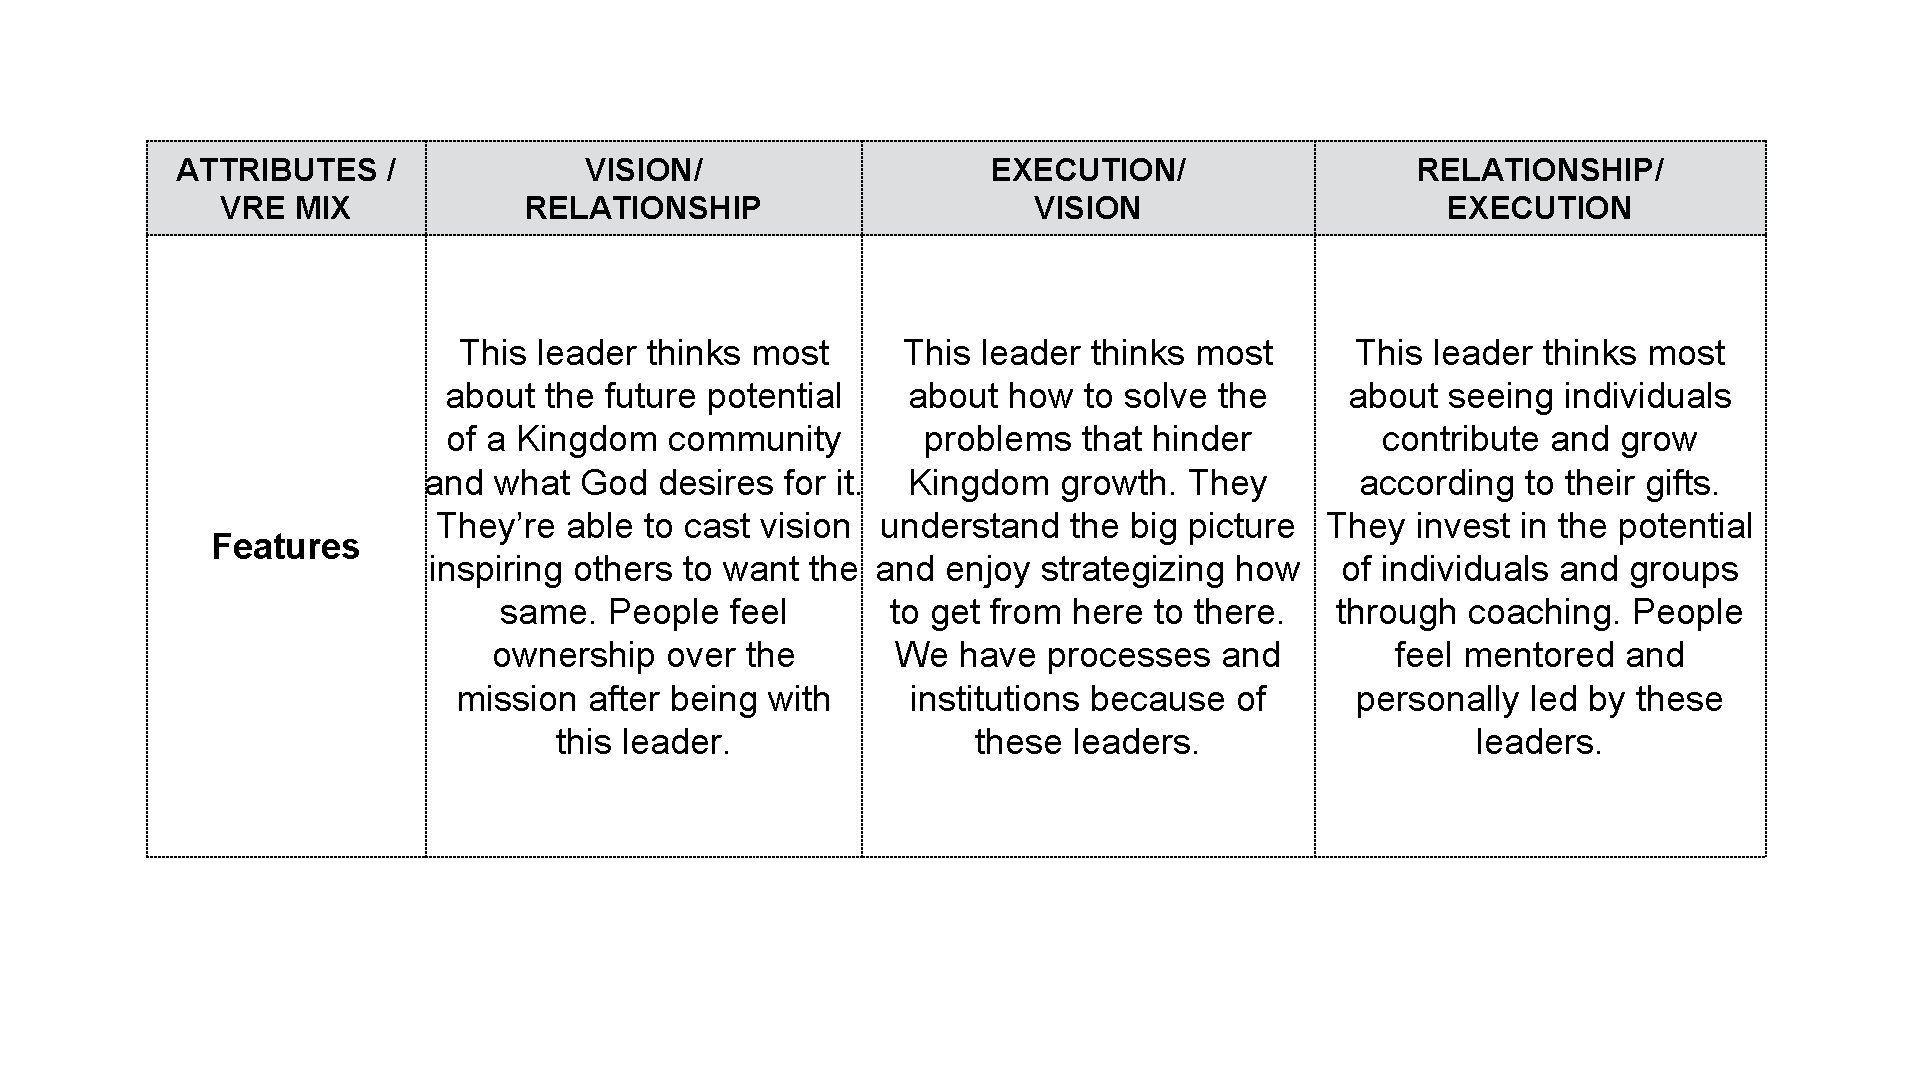 ATTRIBUTES / VRE MIX VISION/ RELATIONSHIP Features This leader thinks most about the future